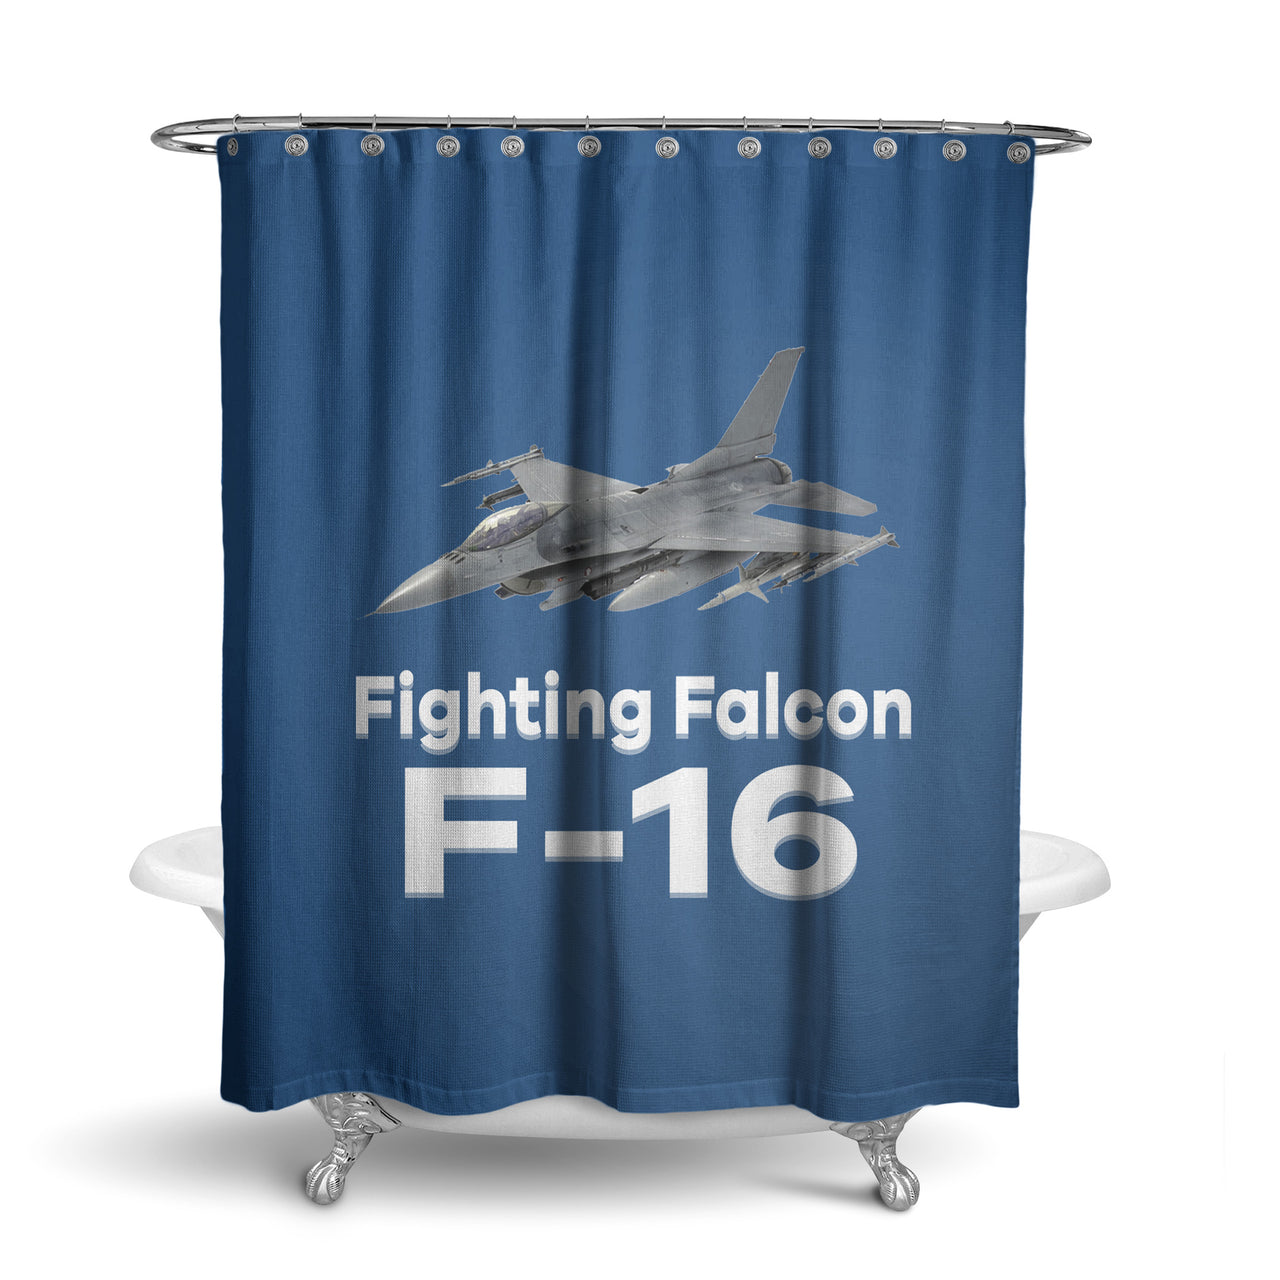 The Fighting Falcon F16 Designed Shower Curtains